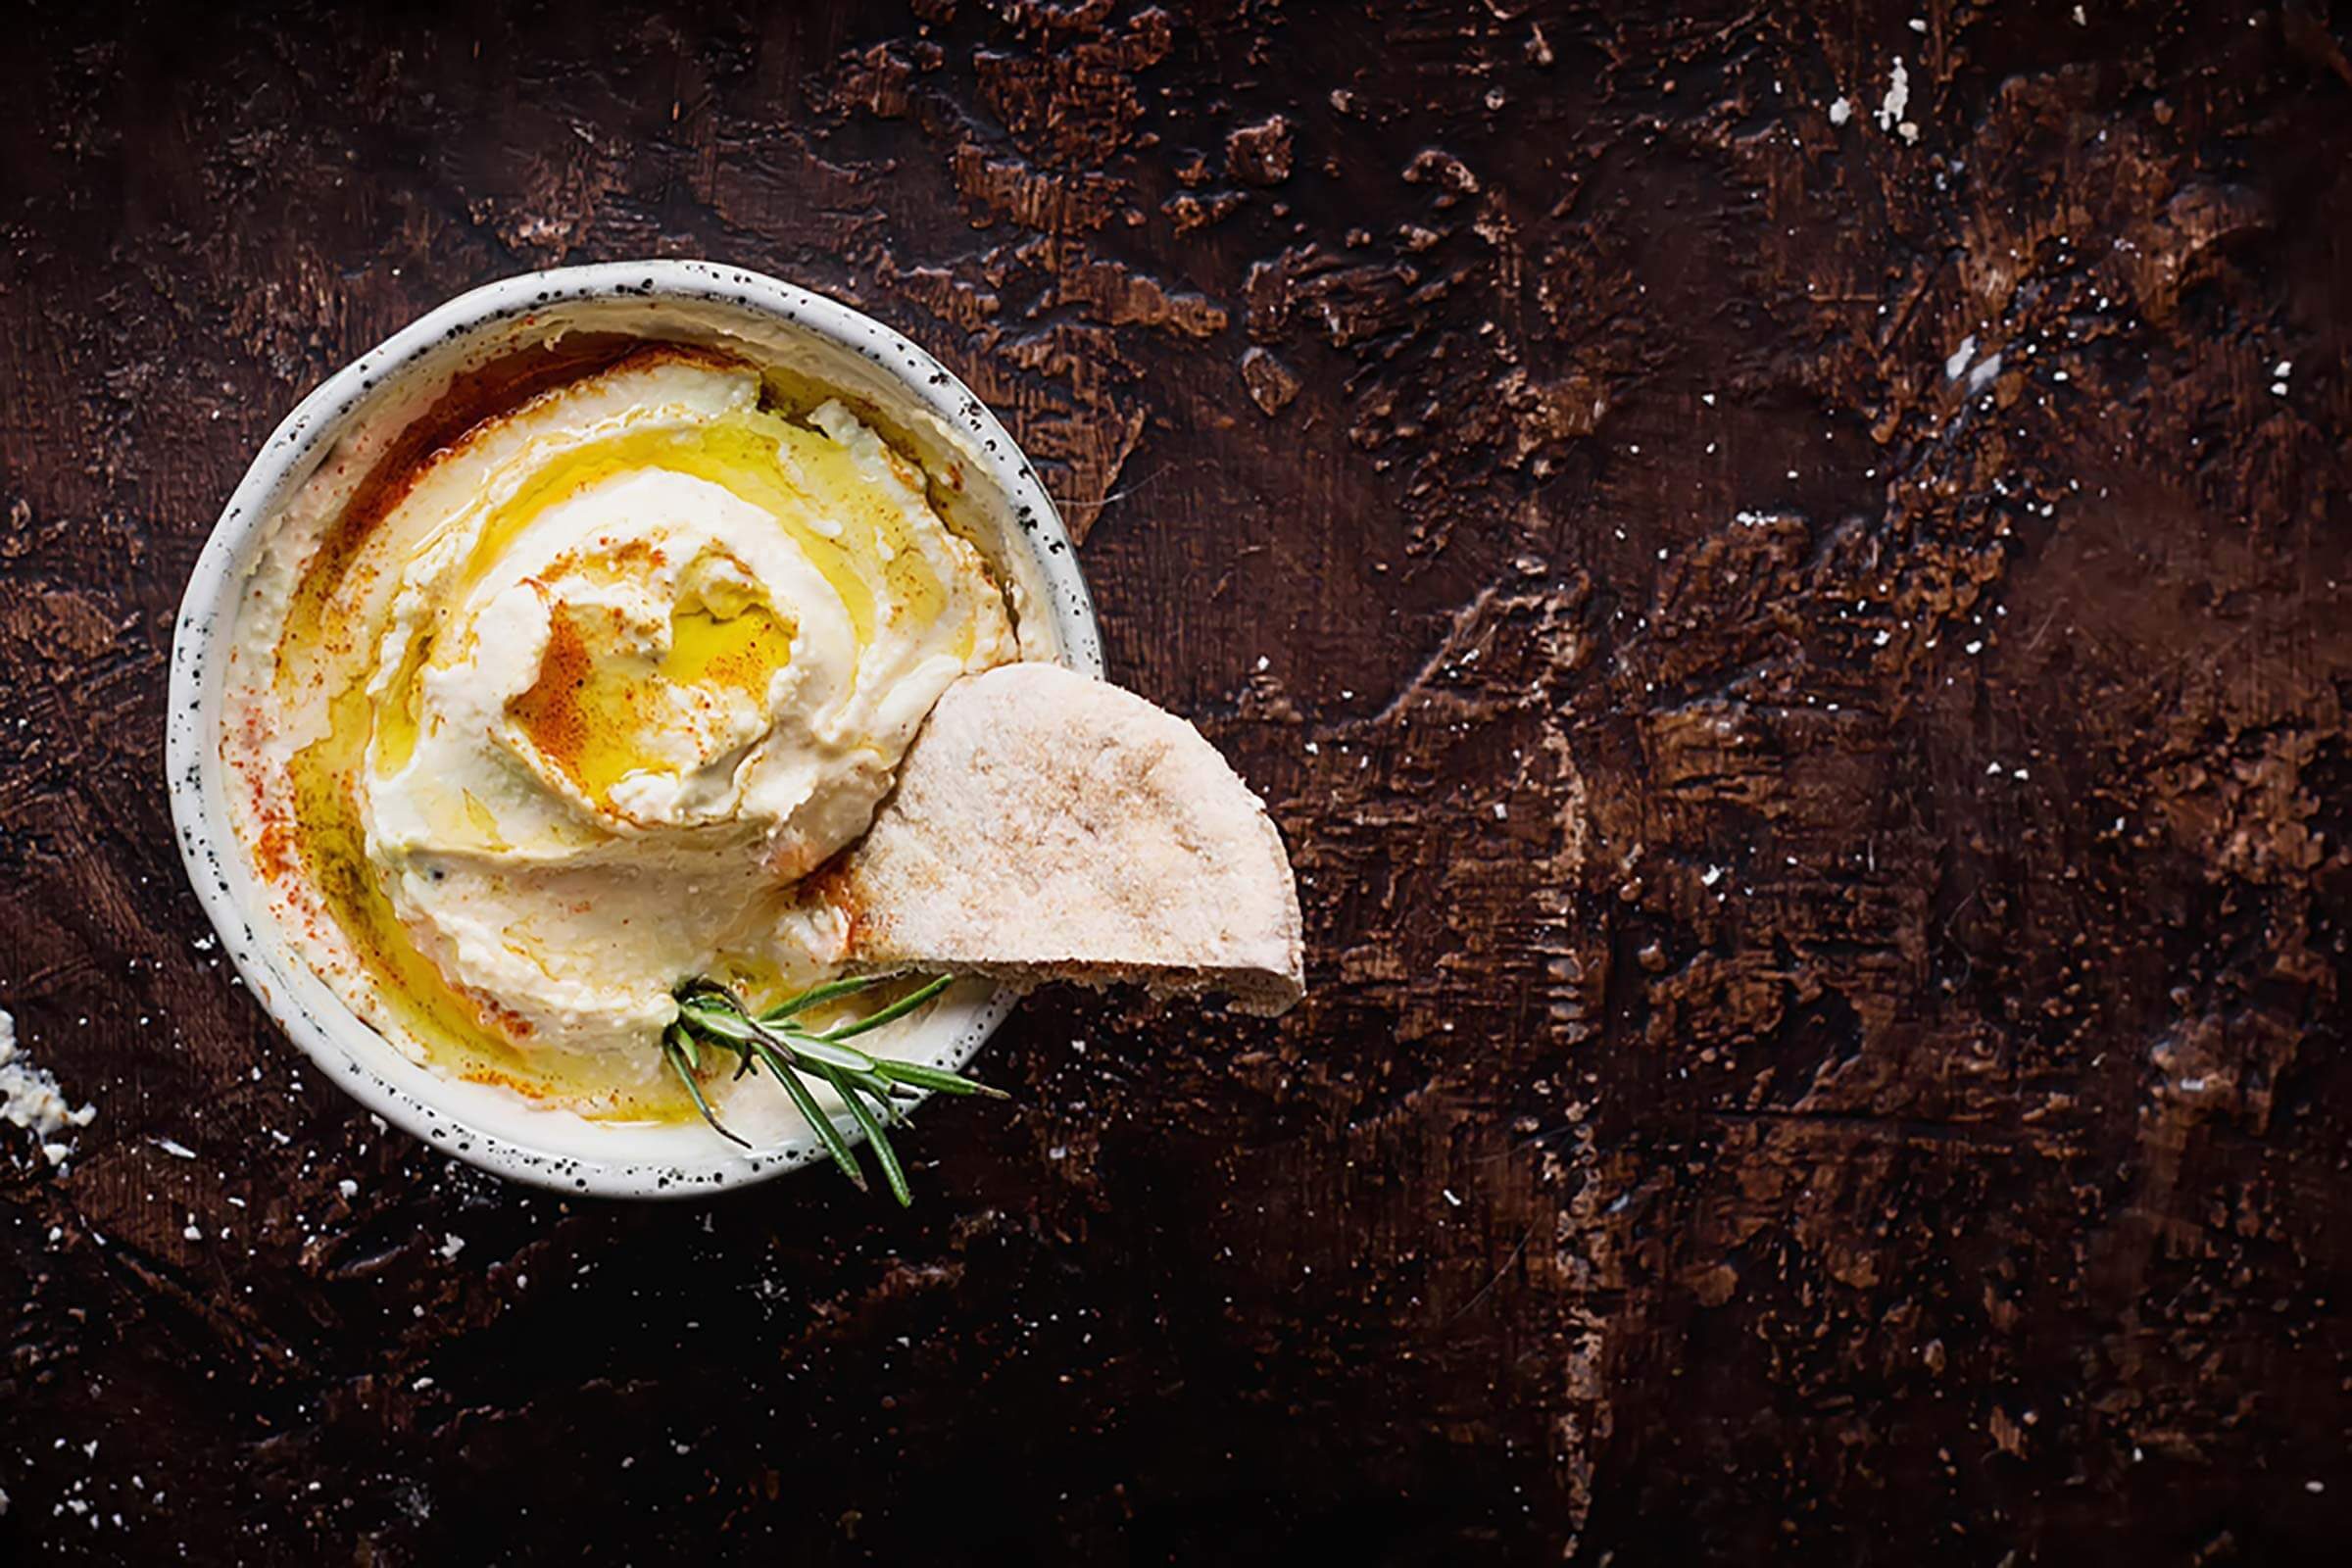 Hummus in a bowl with rosemary and pita